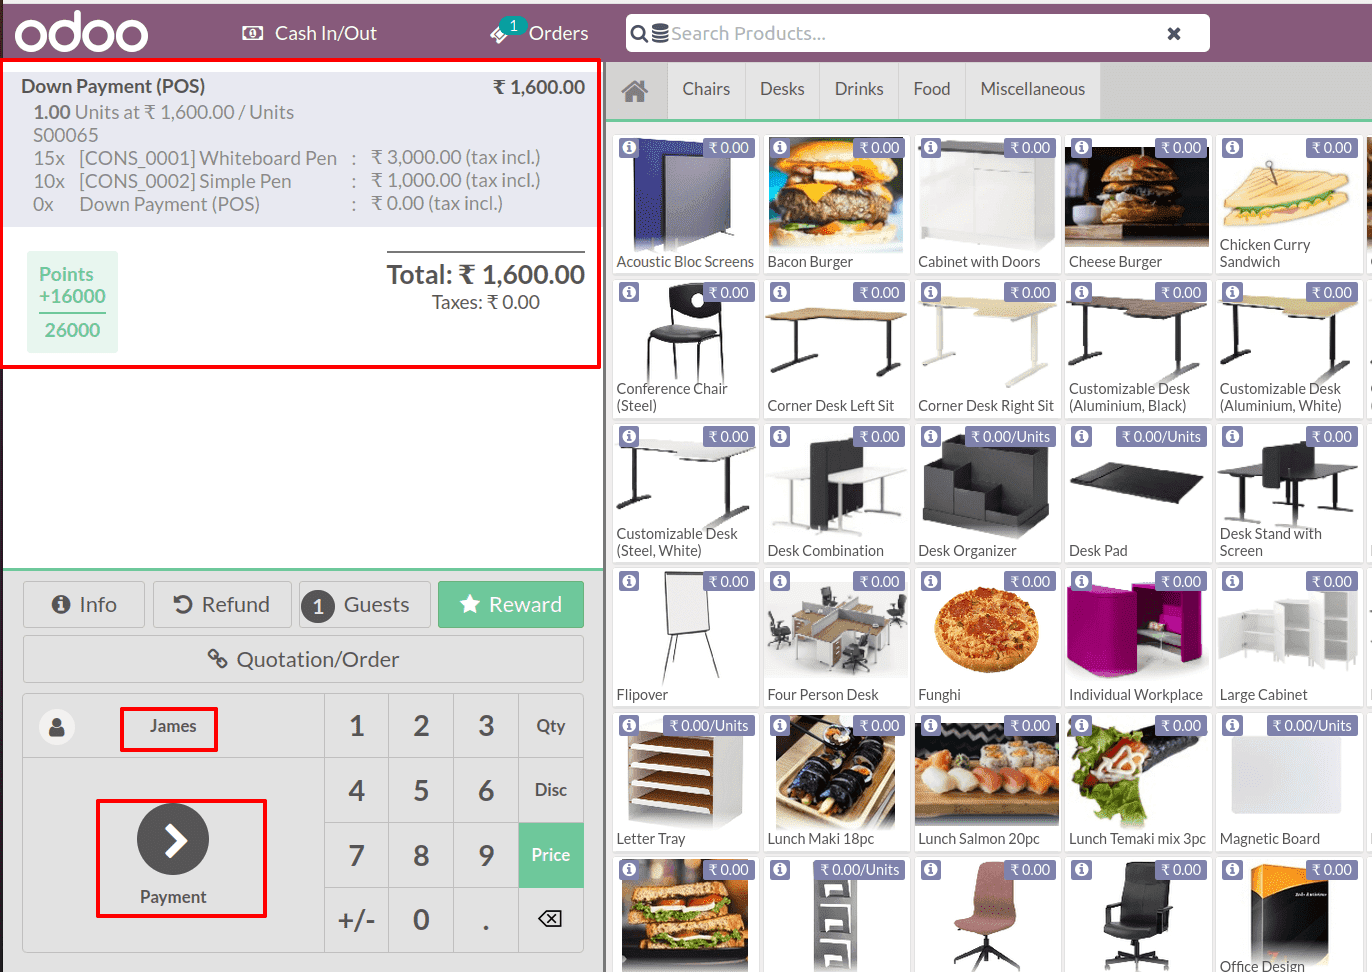 down-payment-in-odoo-15-pos